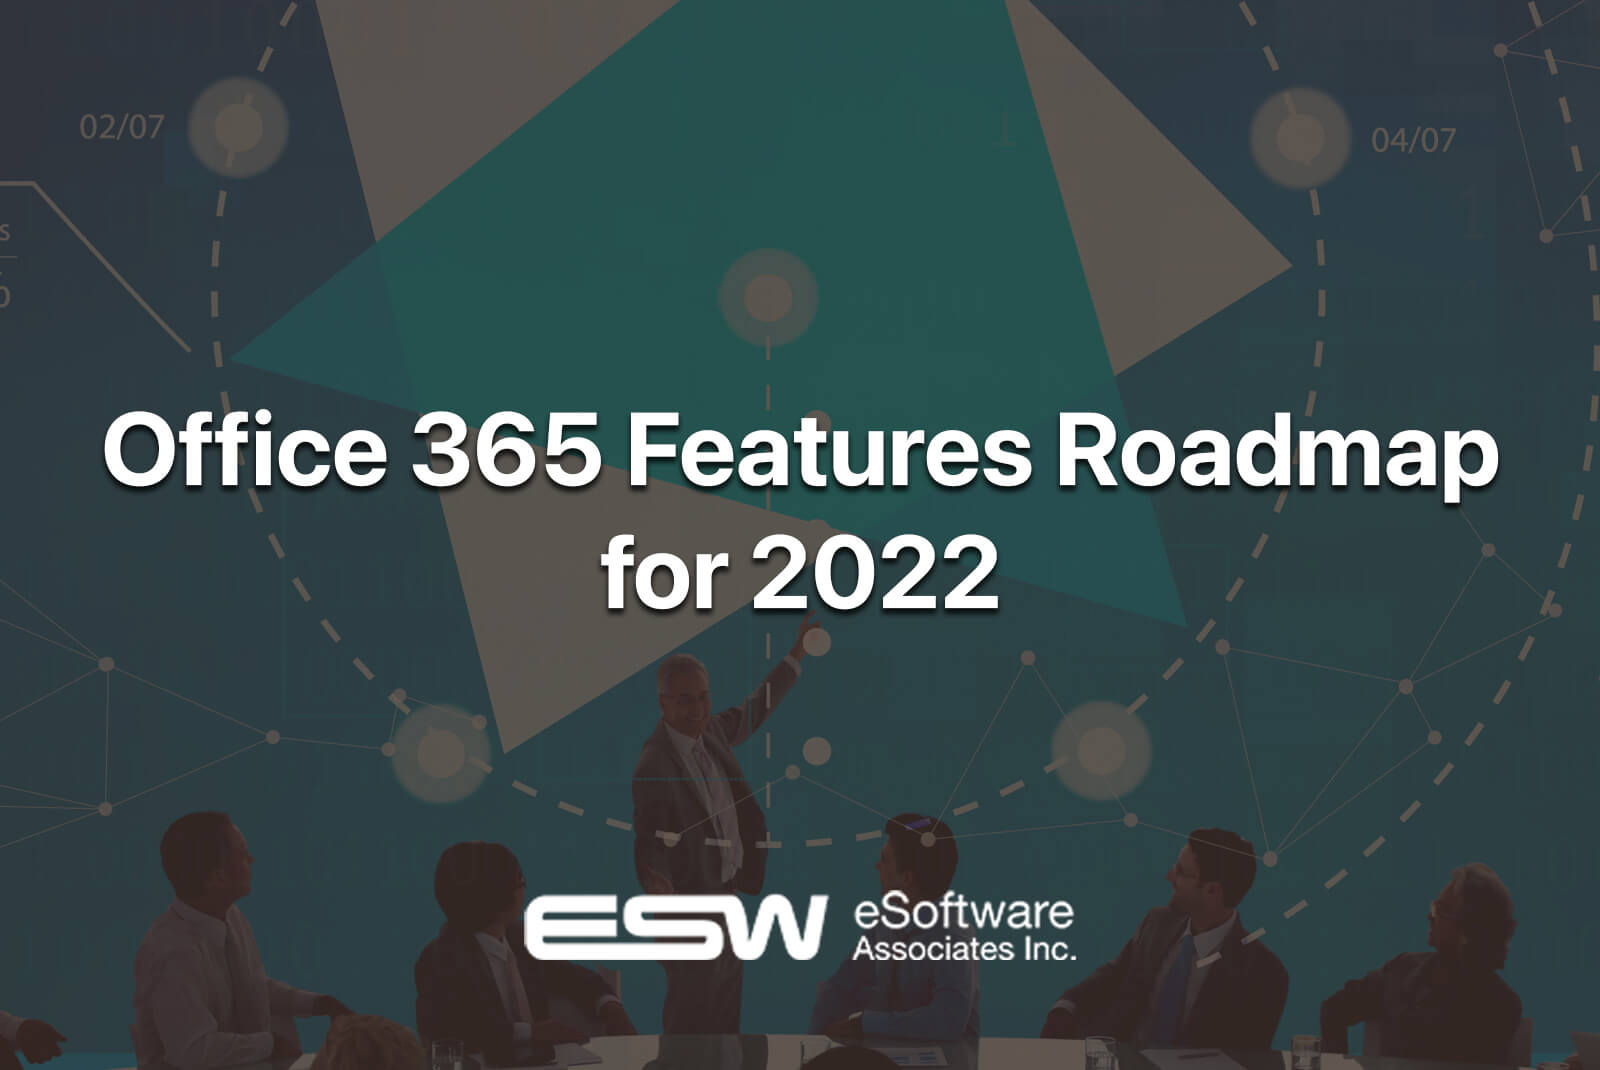 Office 365 Features Roadmap for 2022